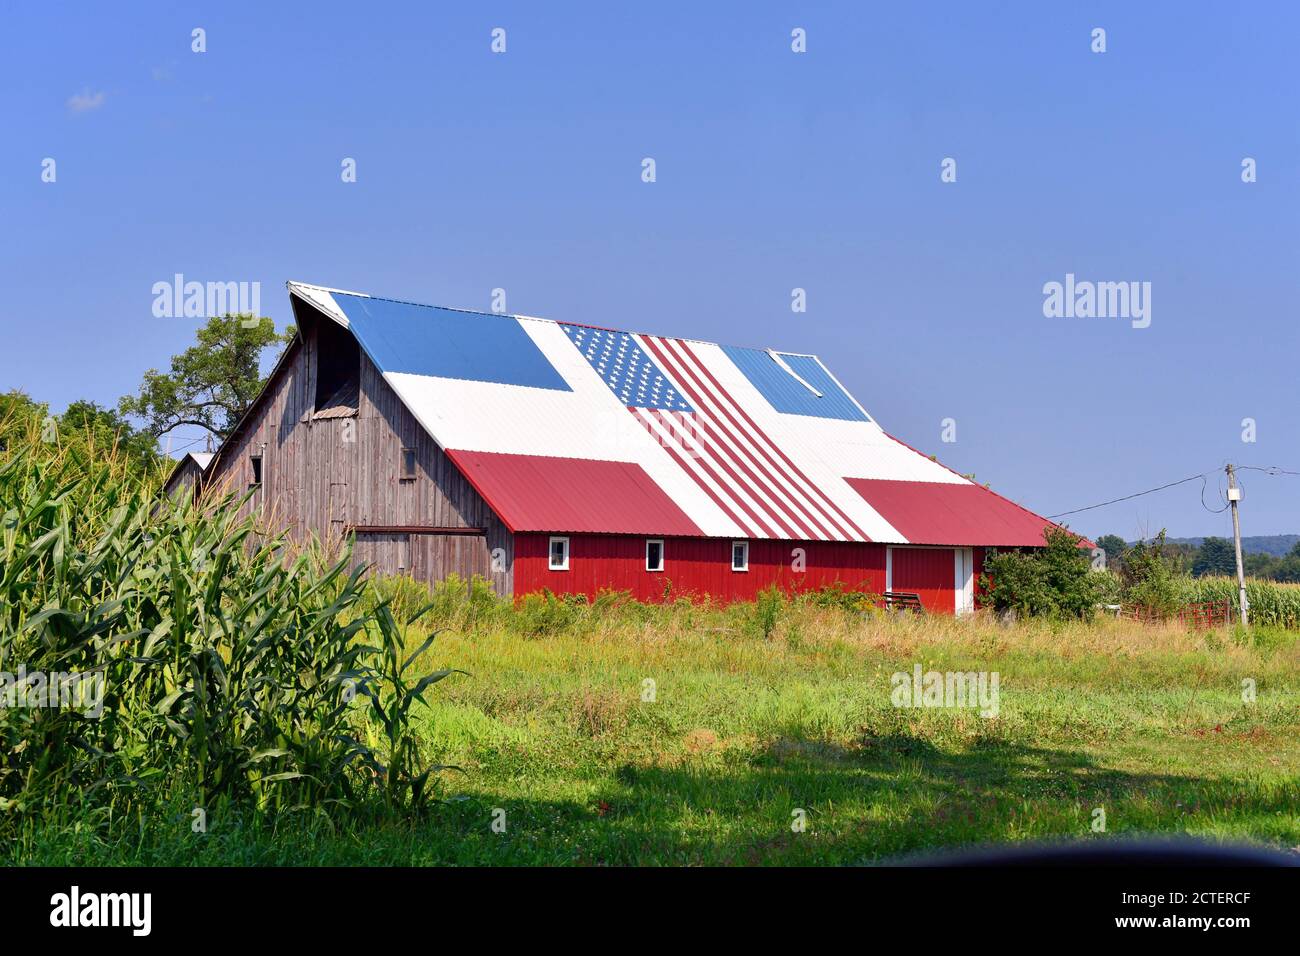 Sabula, Iowa, USA. An old veteran barn with a patriotic red, white and blue roof complete with an American flag. Stock Photo